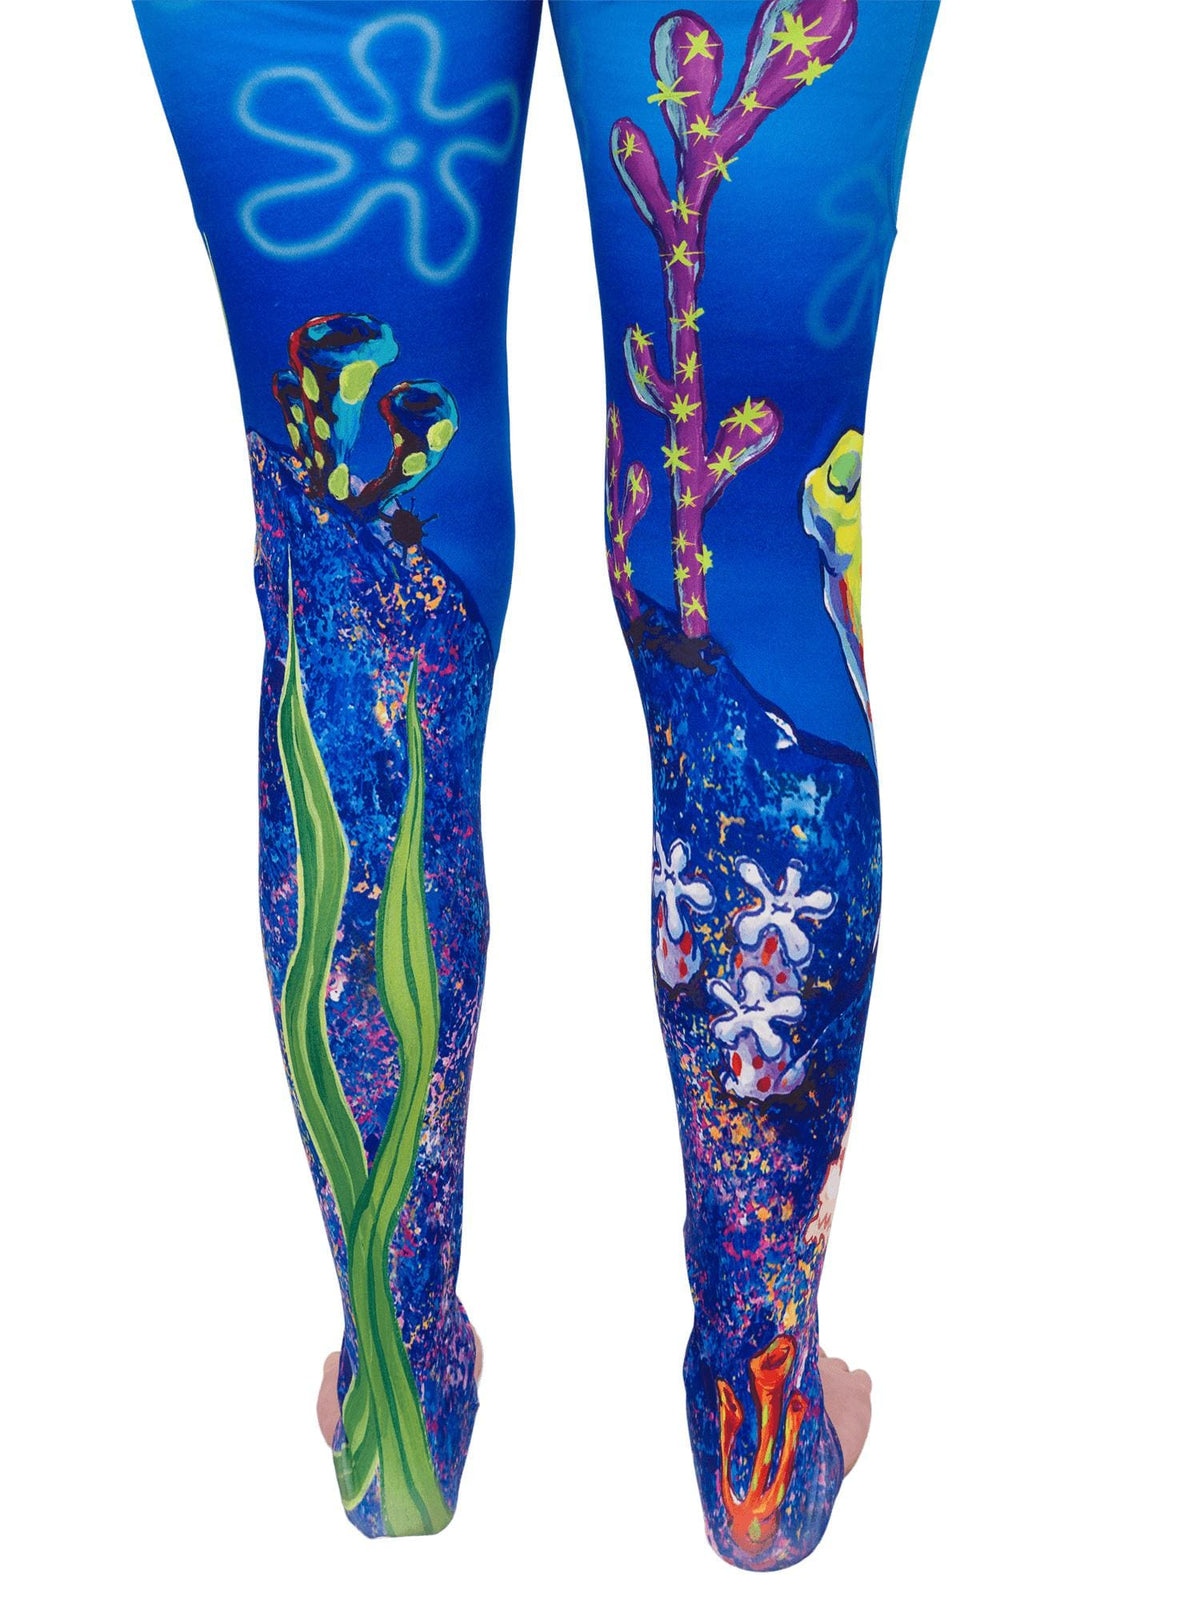 Close up view of the back of the leggings showing detail of the coral, sponges and seaweed art for spongebob leggings.